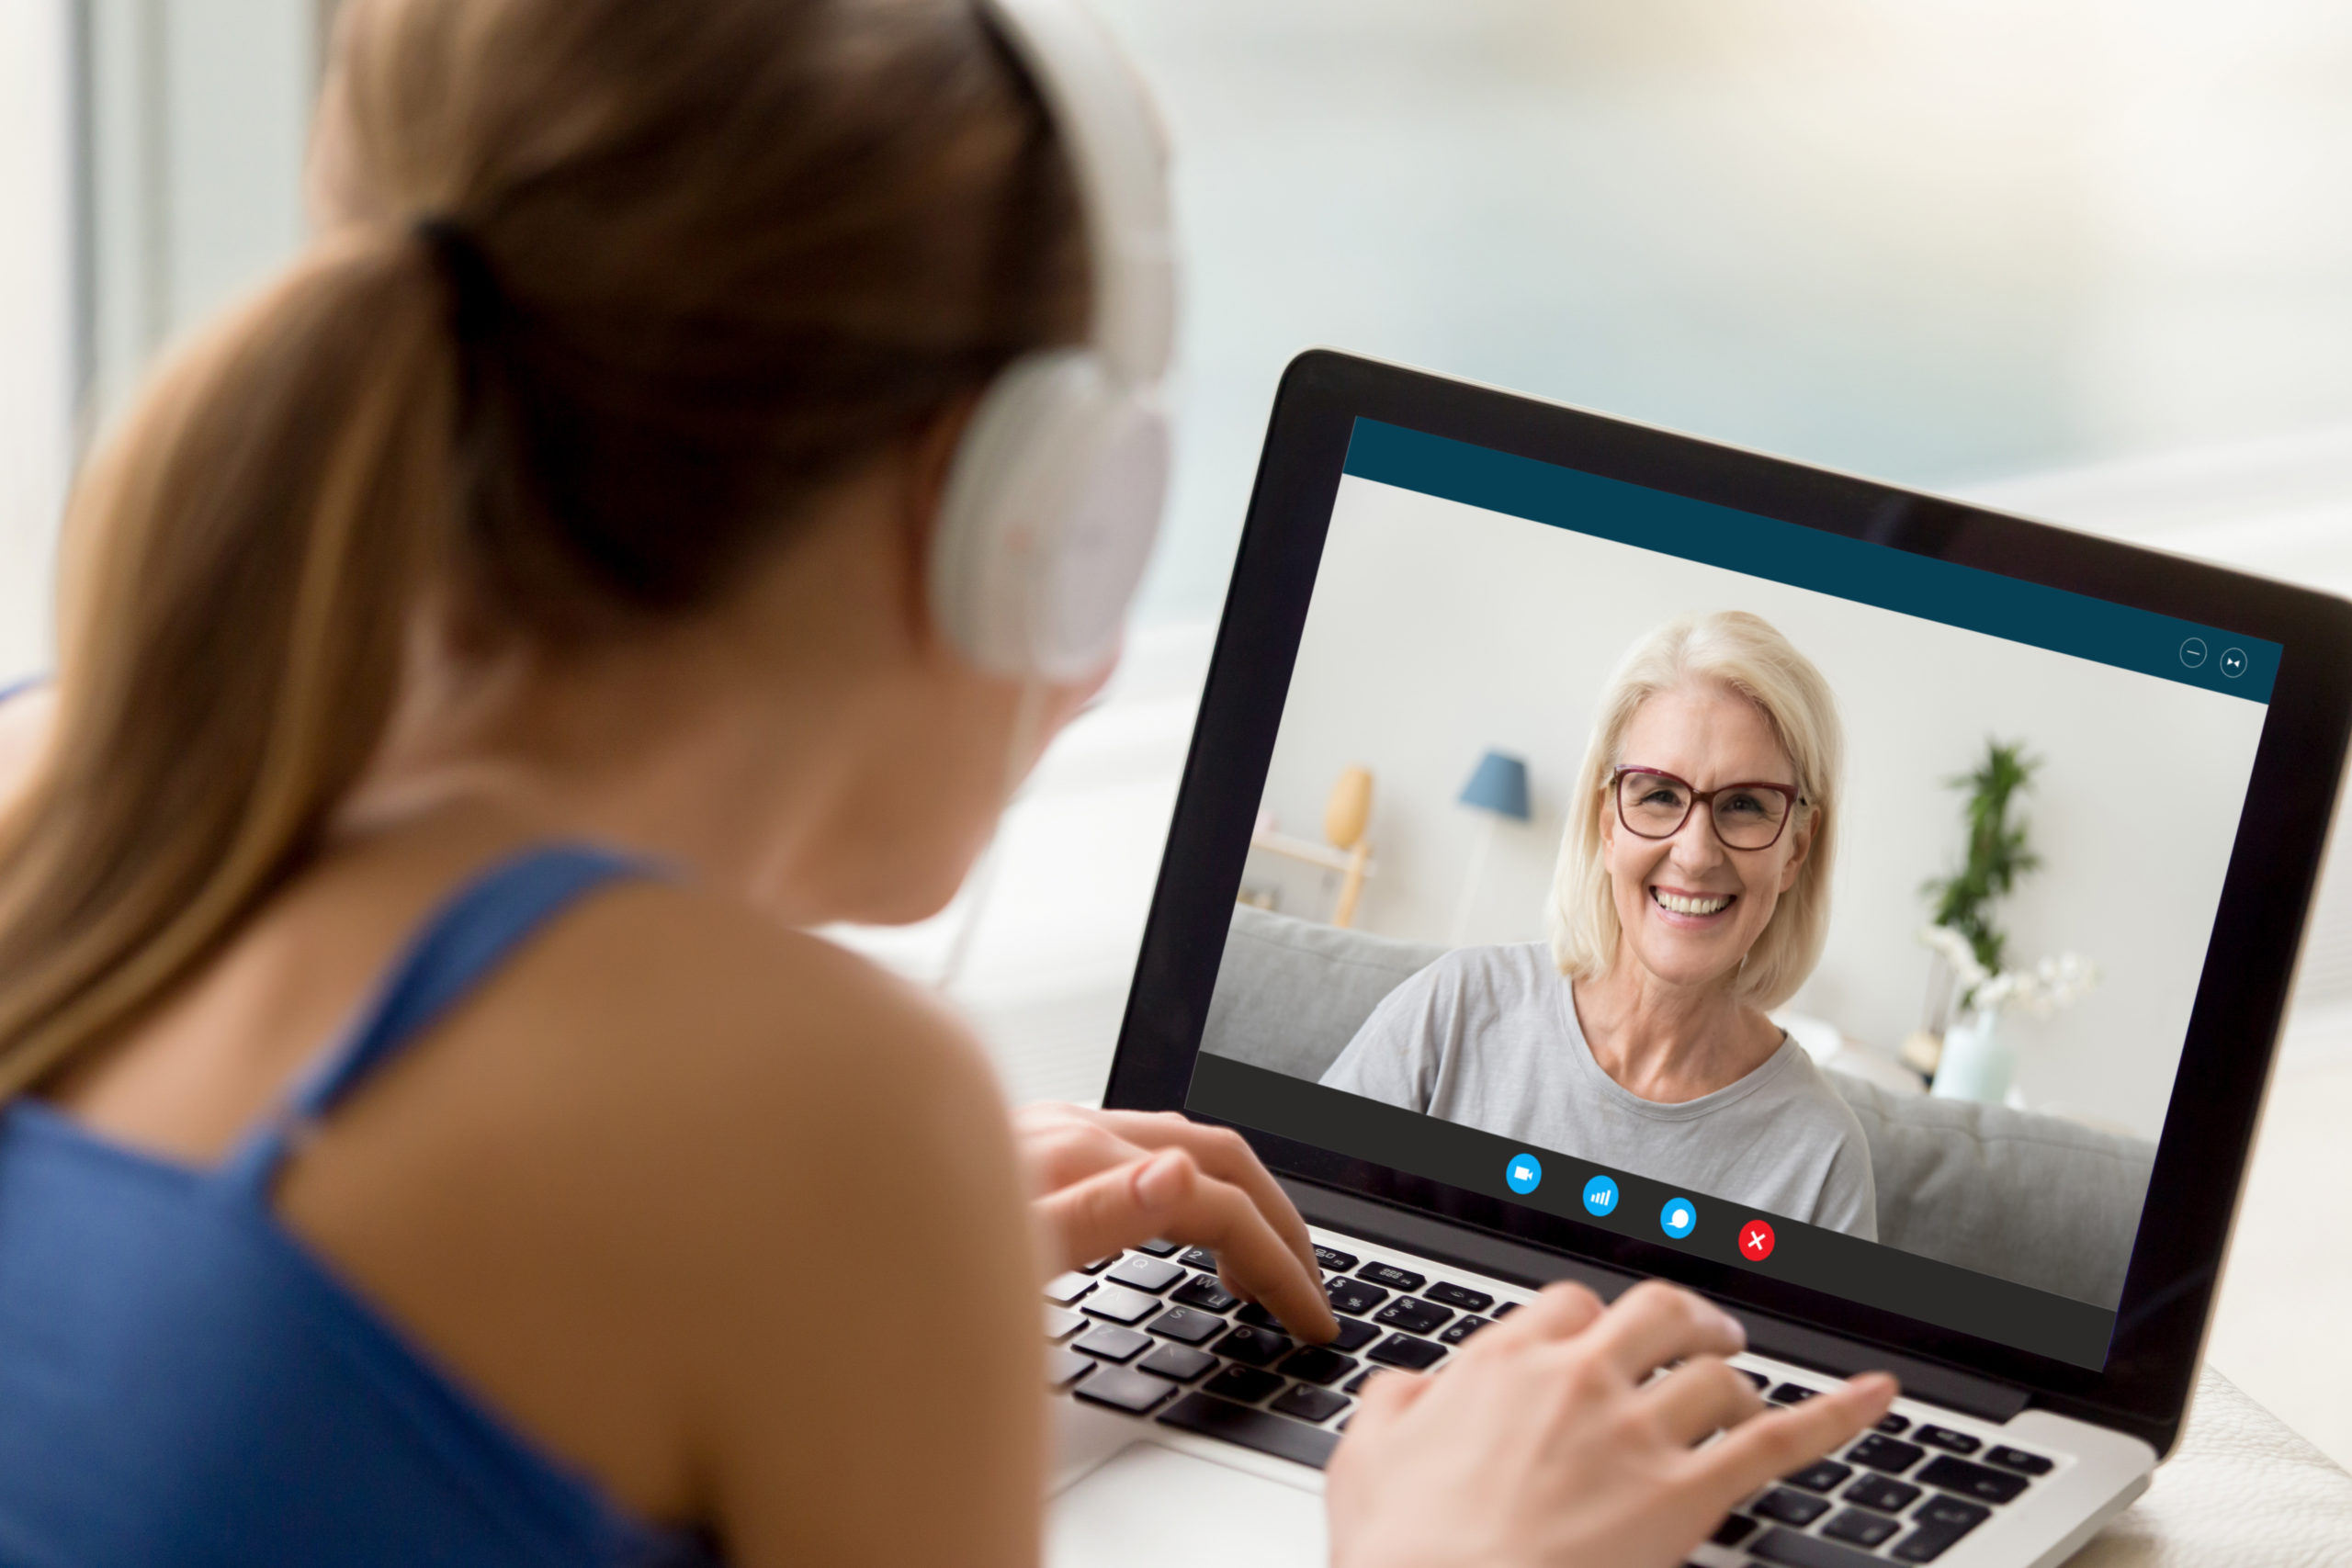 4 Ways to Simplify Video Calls with Older Loved Ones